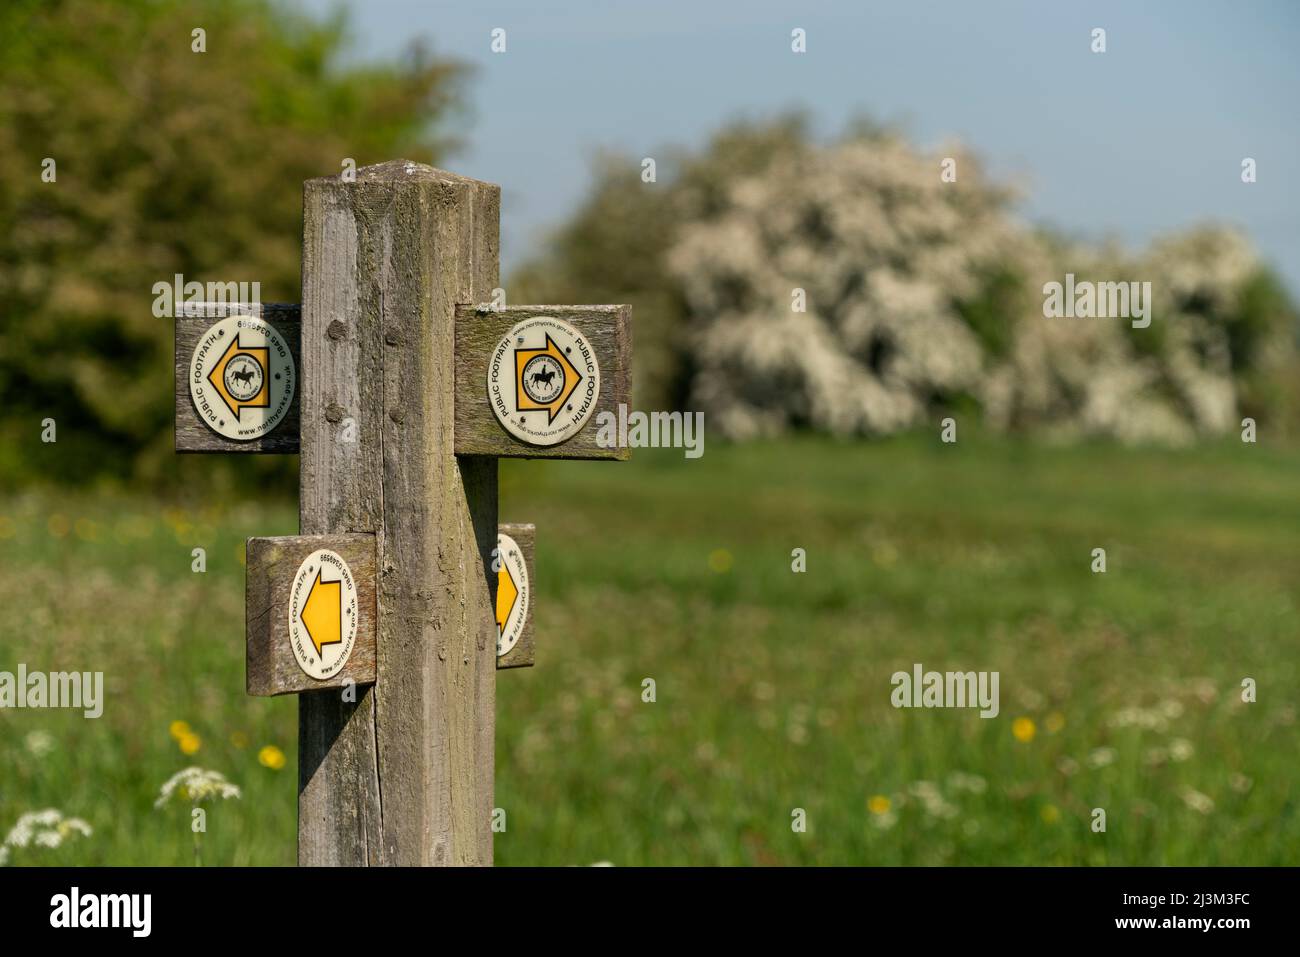 Directional signs for a public footpath with a pictogram of a rider on horseback on an arrow; Ravensworth, Richmondshire, England Stock Photo